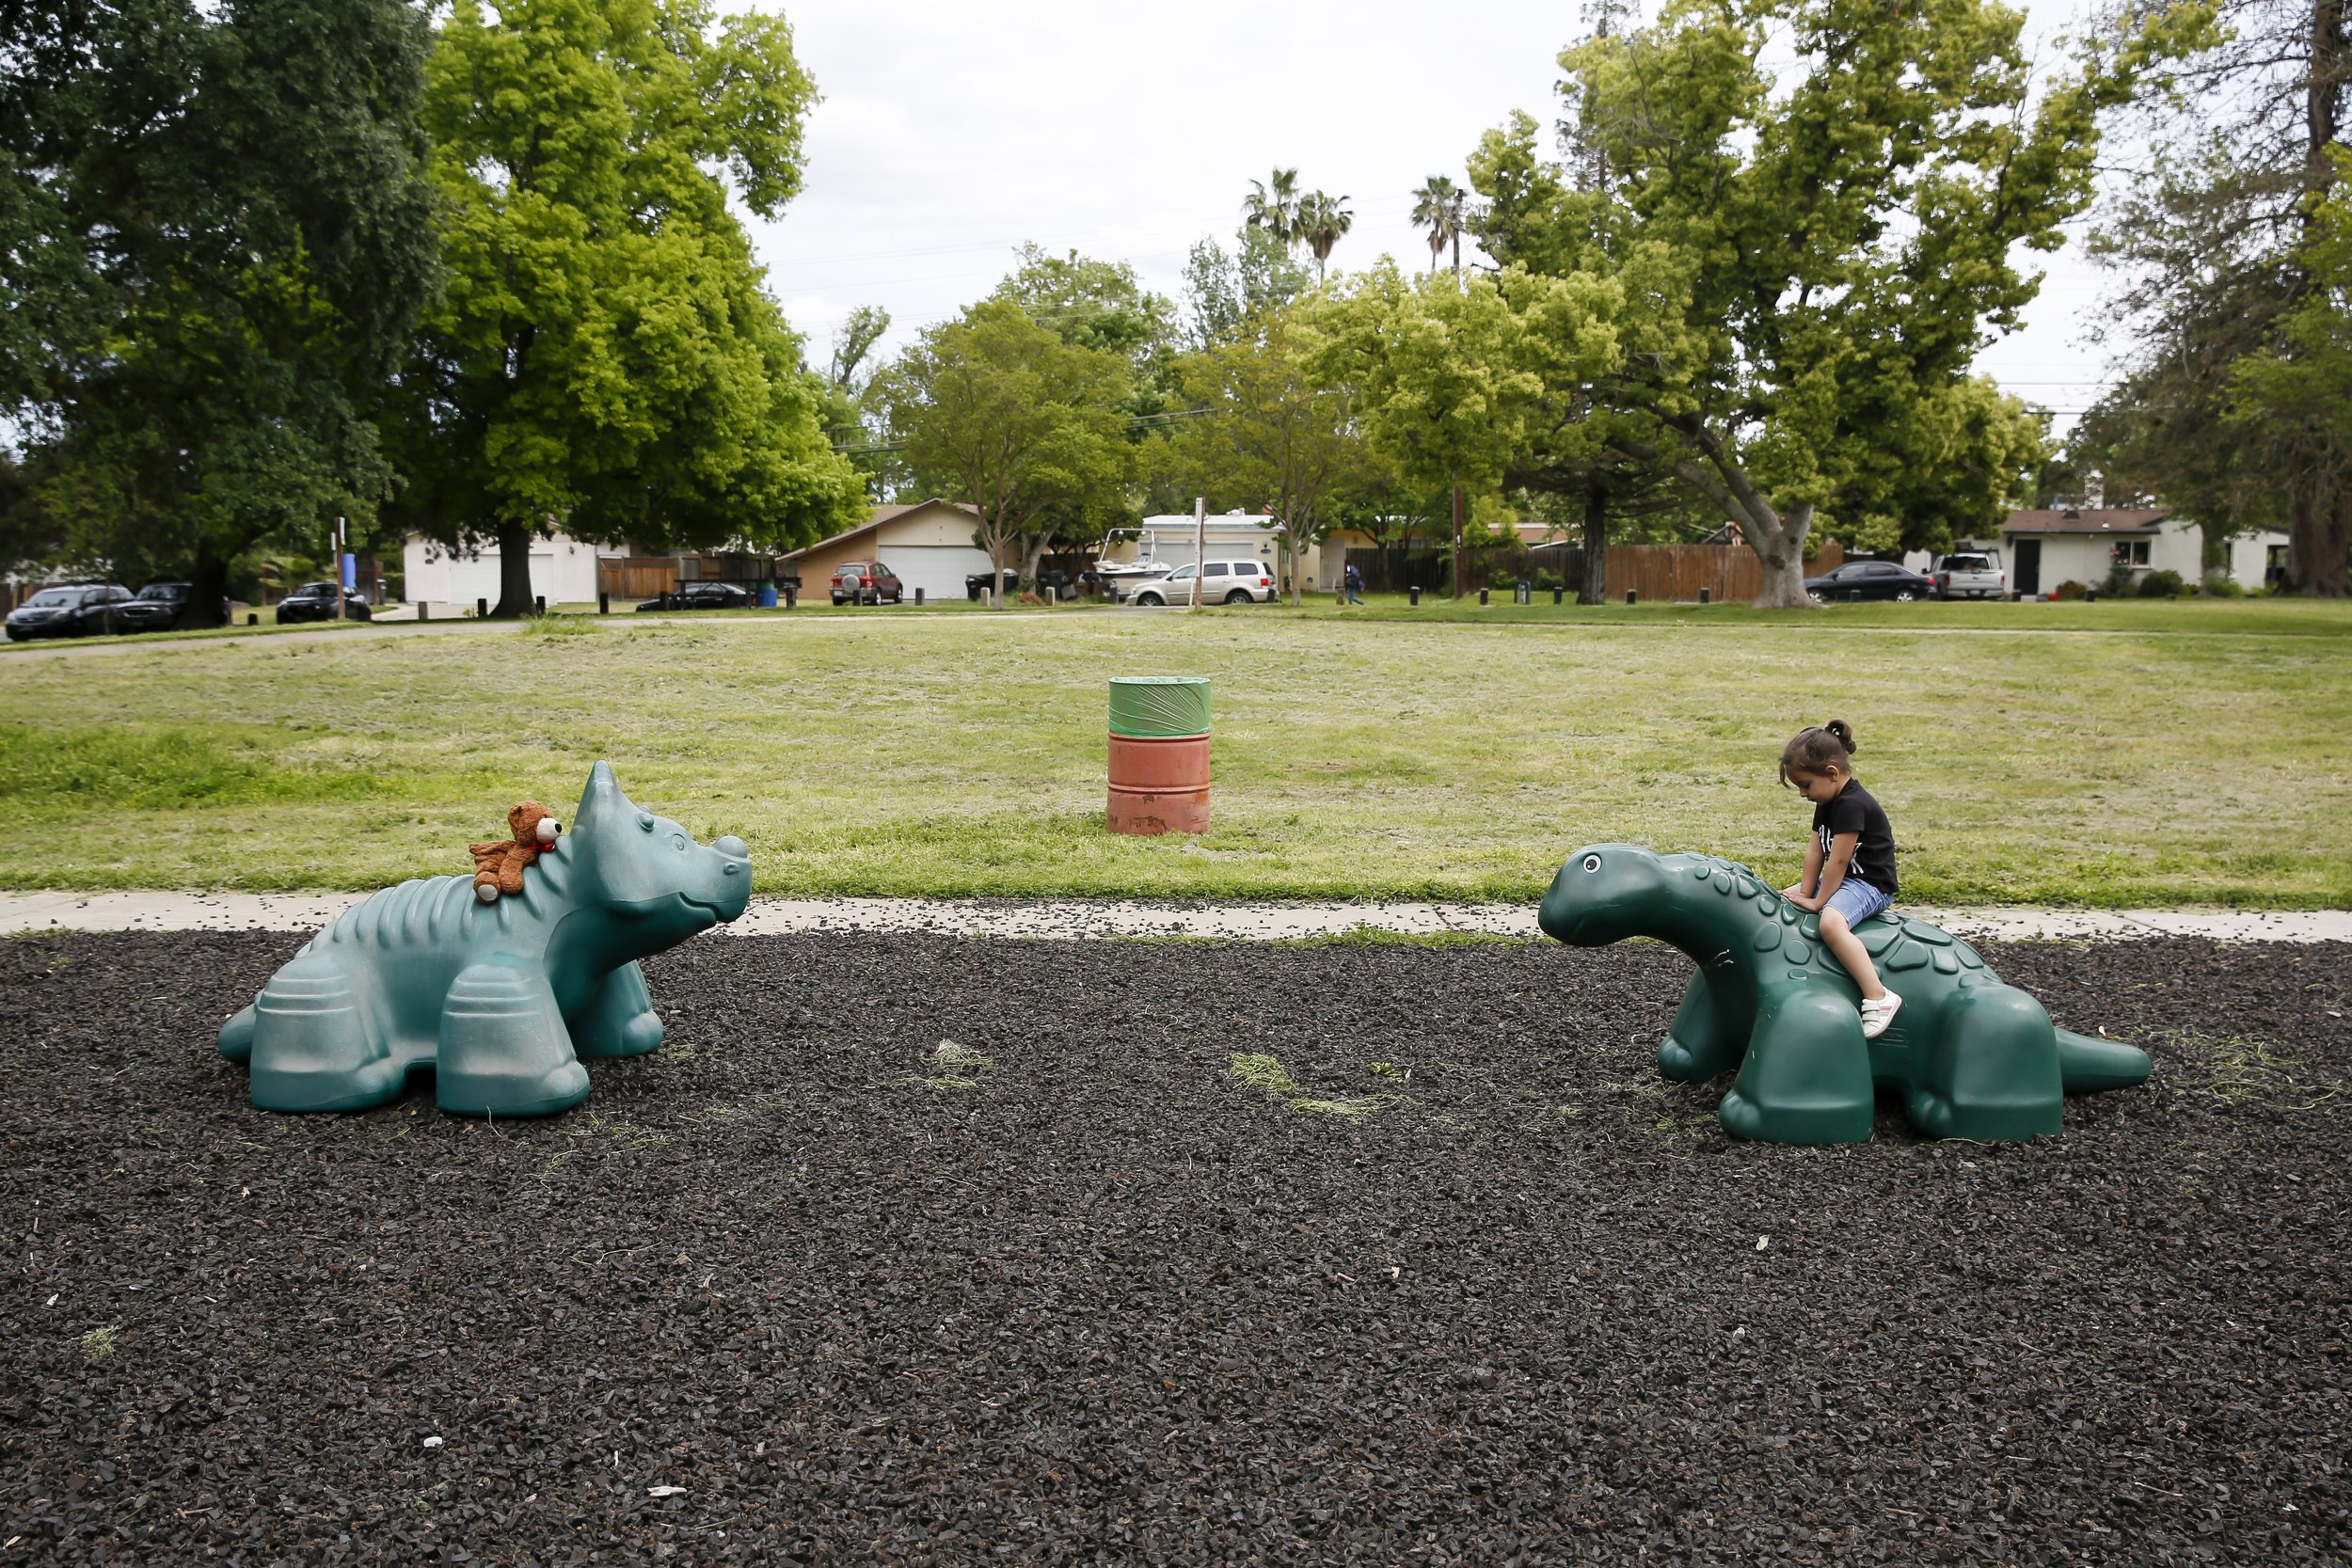  Zahra Mohammadi (3) plays by herself on a a toy dinosaur with her stuffed bear at a playground in Sacramento, Calif.  on Wednesday, April 13, 2022. Najibullah Mohammadi, his wife Susan, their two young children Zahra and Yasar, and their soon-to-be 